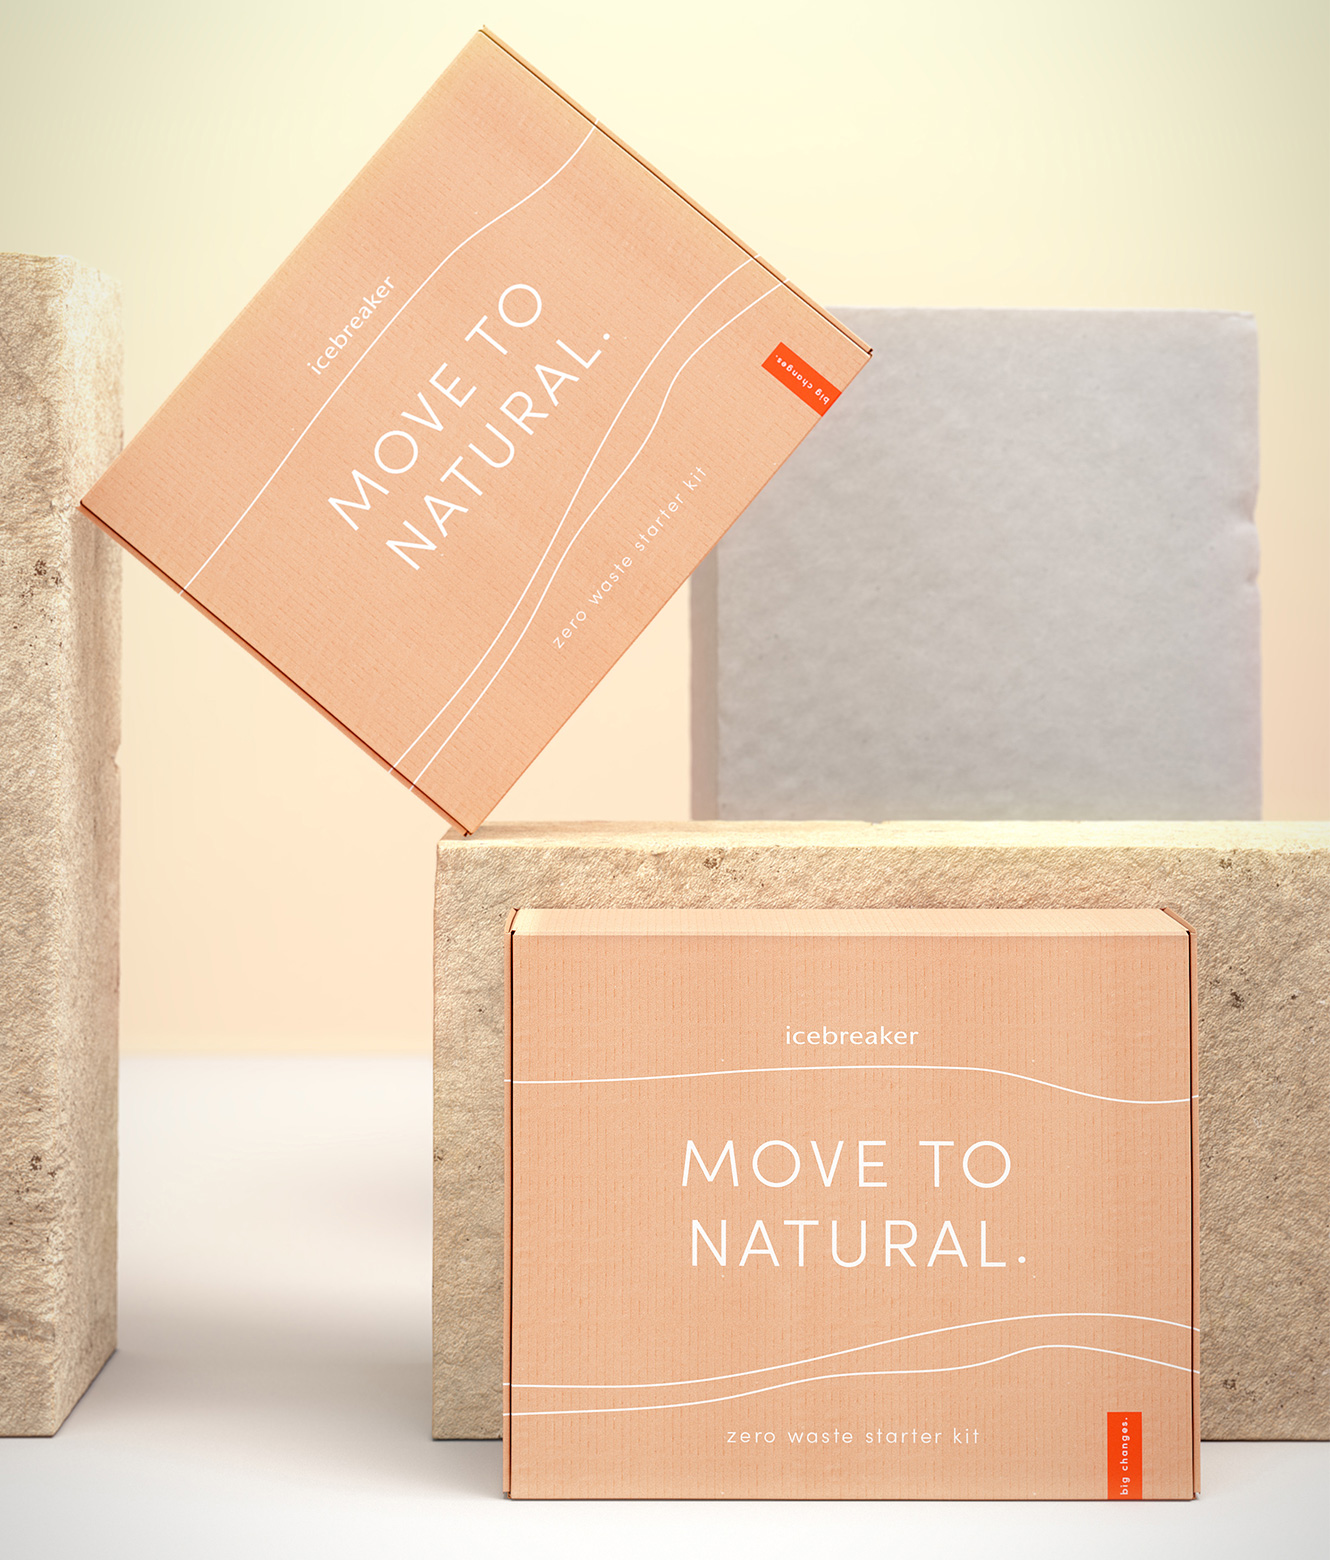 move to natural box made from corrugated cartonboard